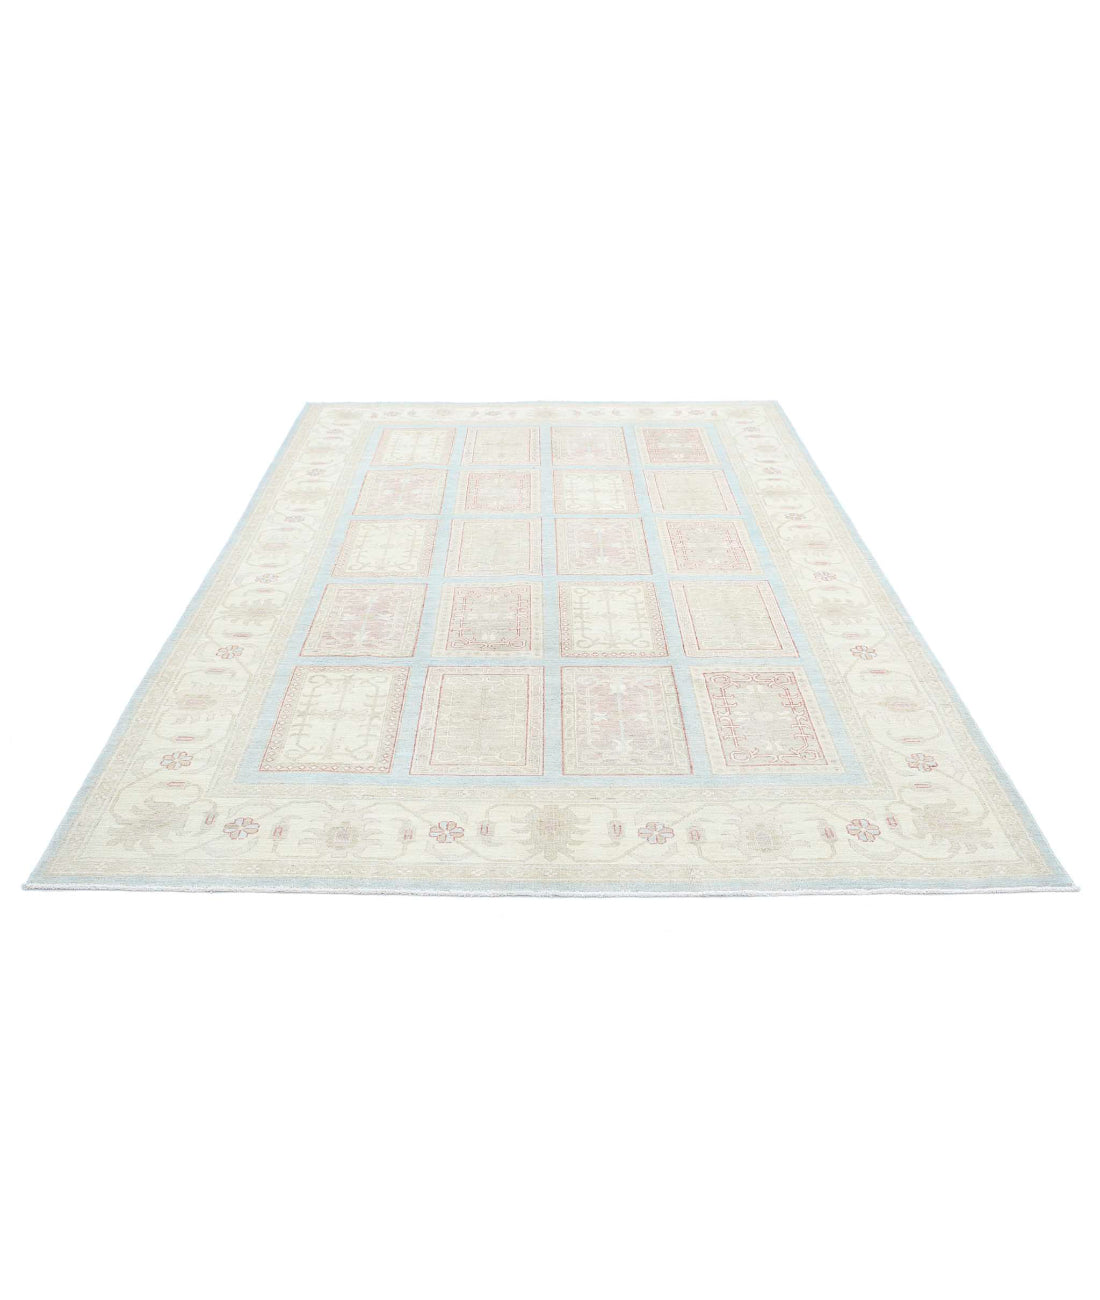 Hand Knotted Serenity Wool Rug - 6'8'' x 9'8'' 6'8'' x 9'8'' (200 X 290) / Blue / Ivory